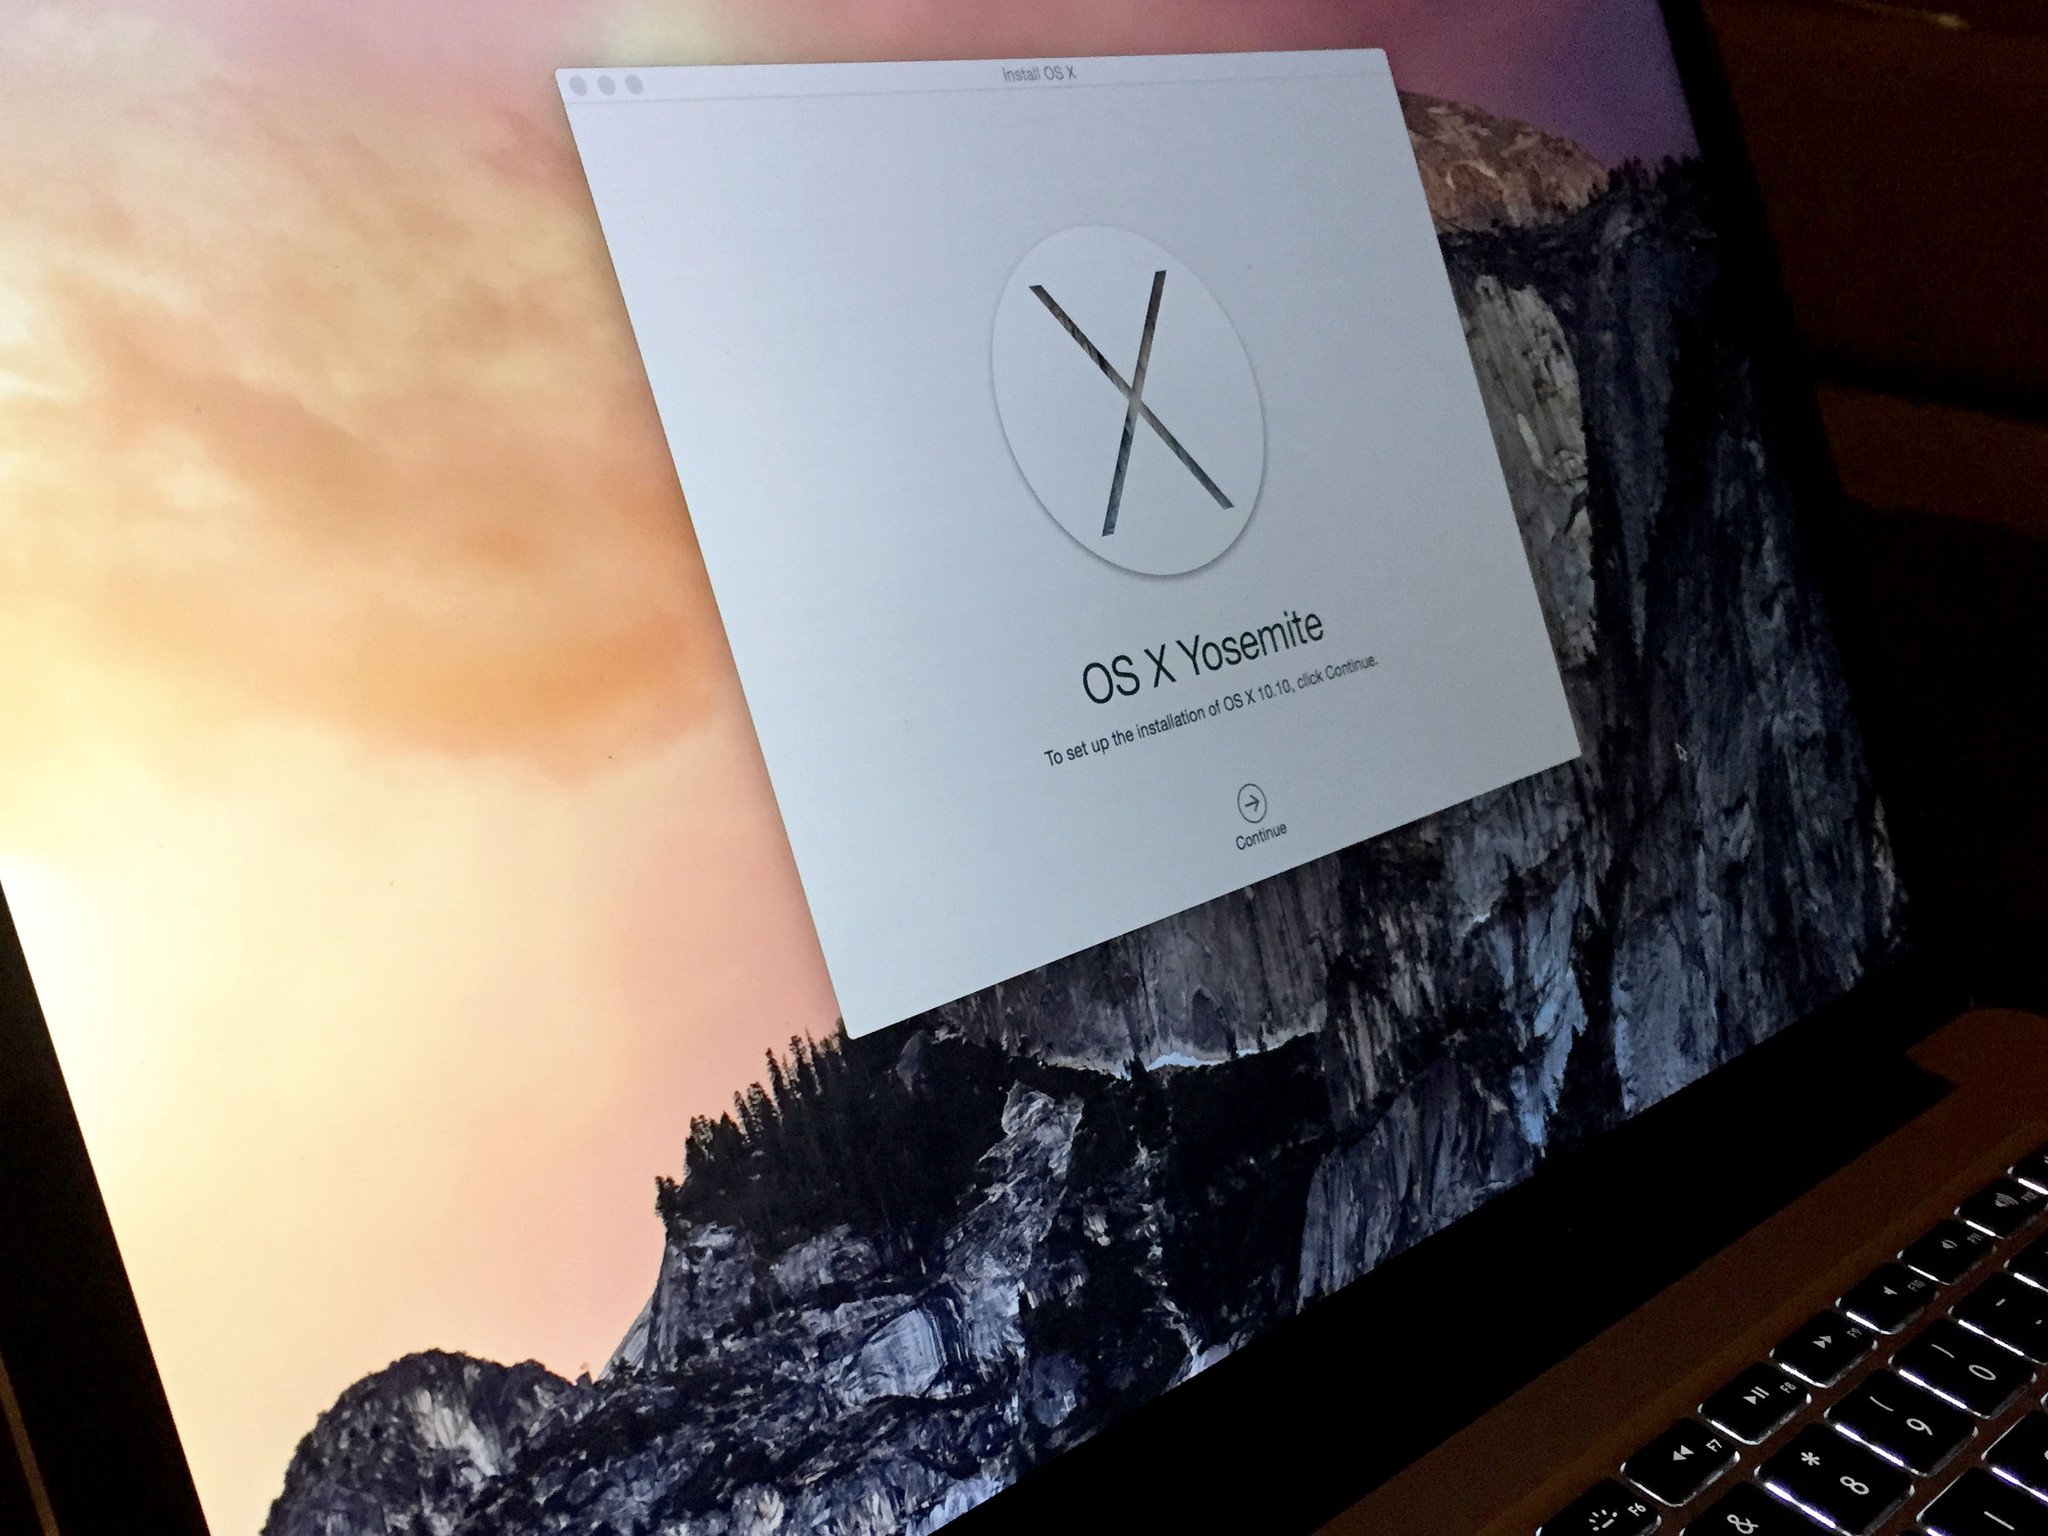 How to make a Yosemite boot drive